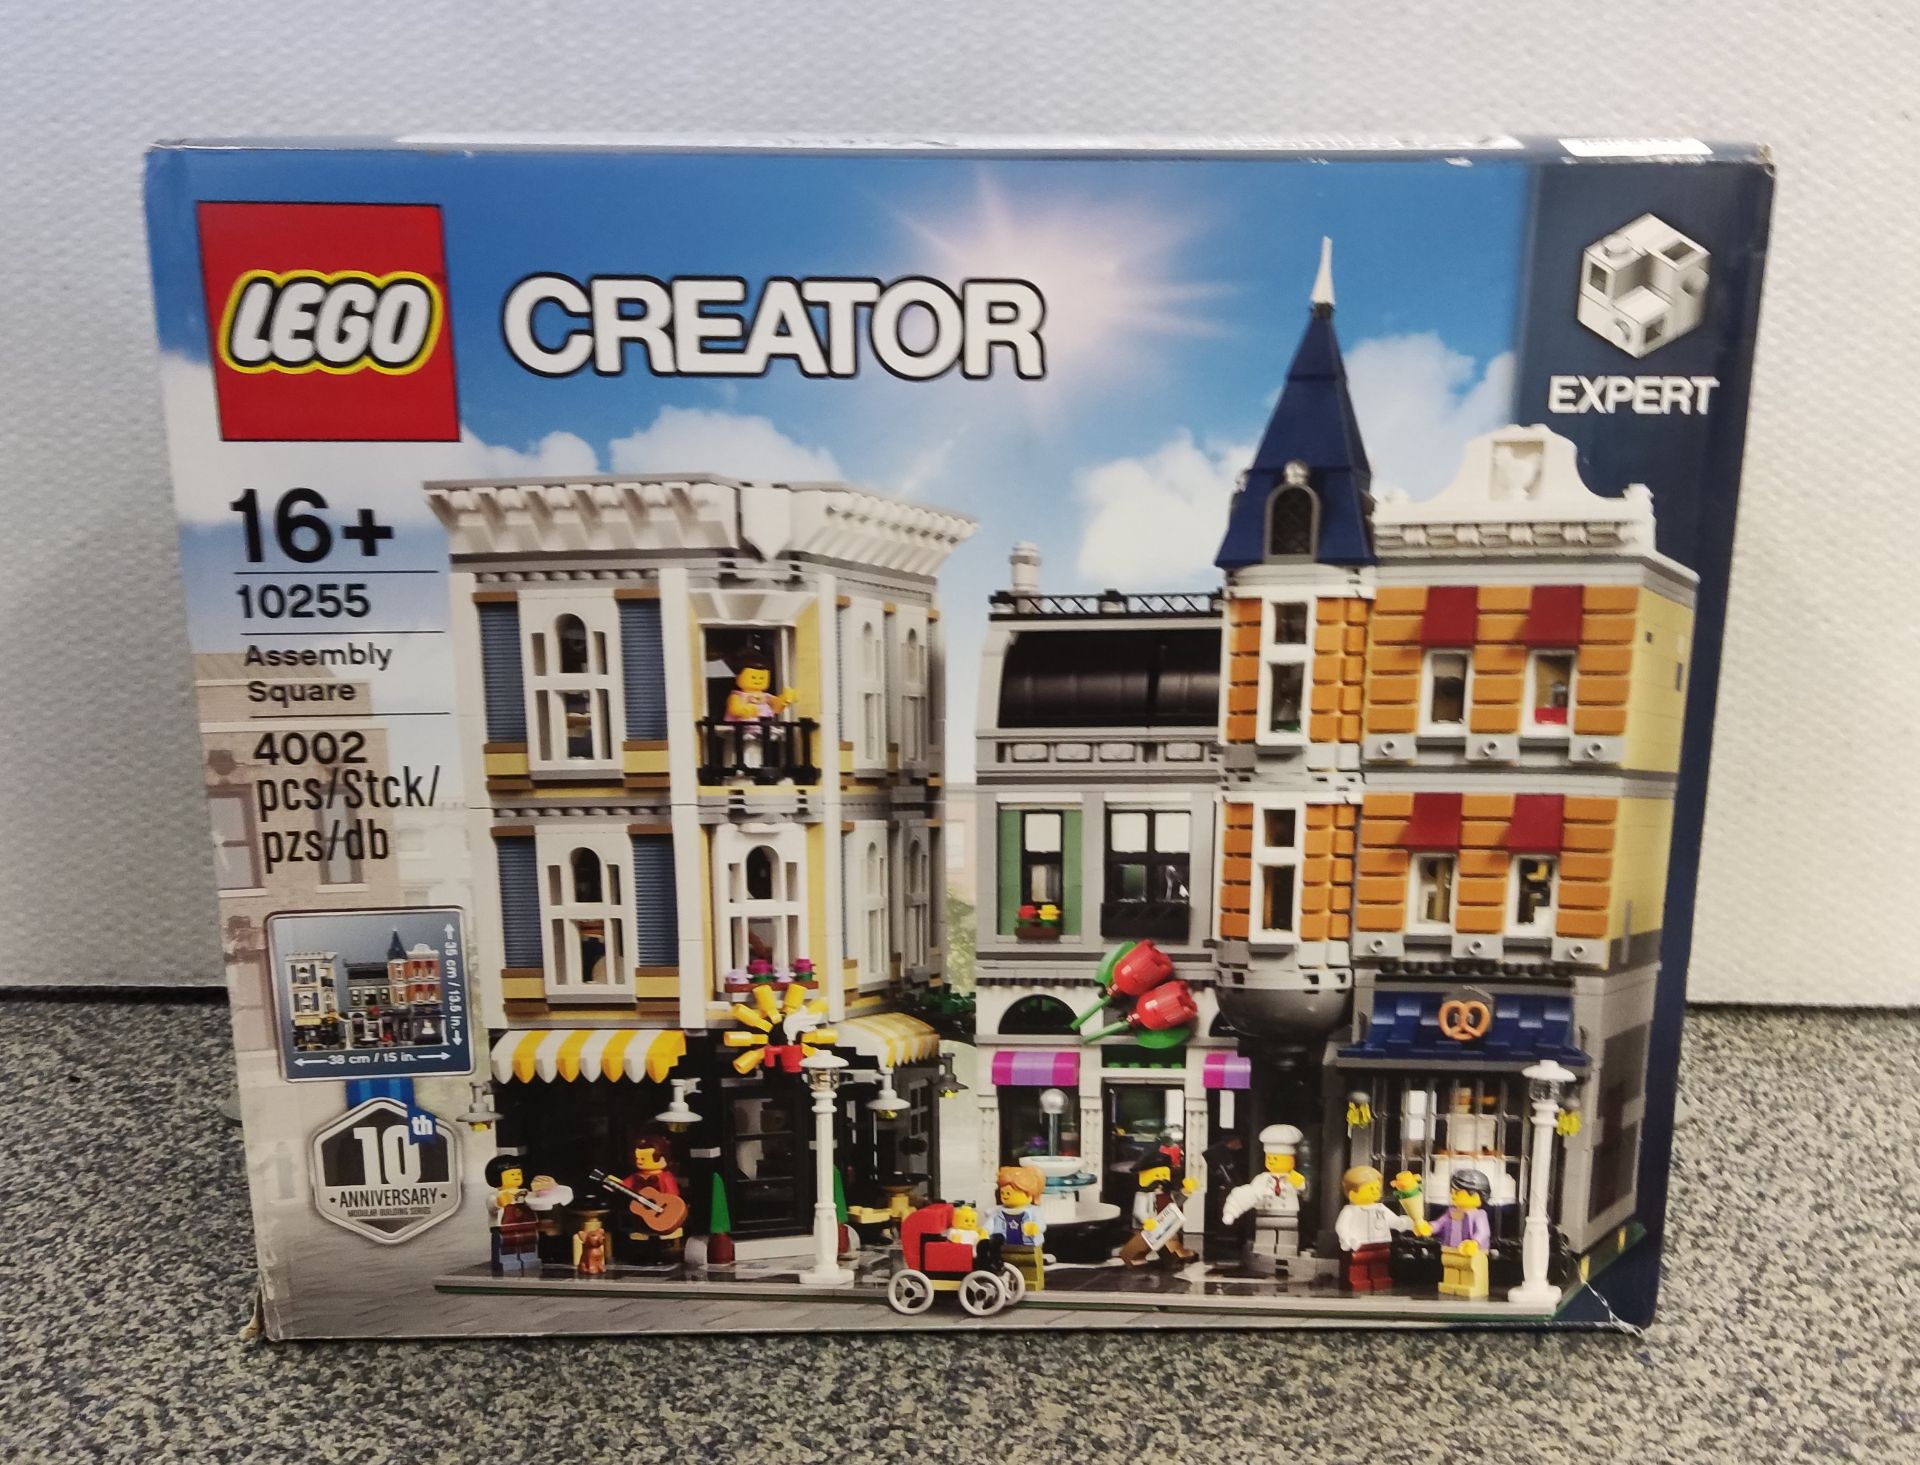 1 x Lego Creator Assembly Square - Set # 10255 - New/Boxed - Image 2 of 6